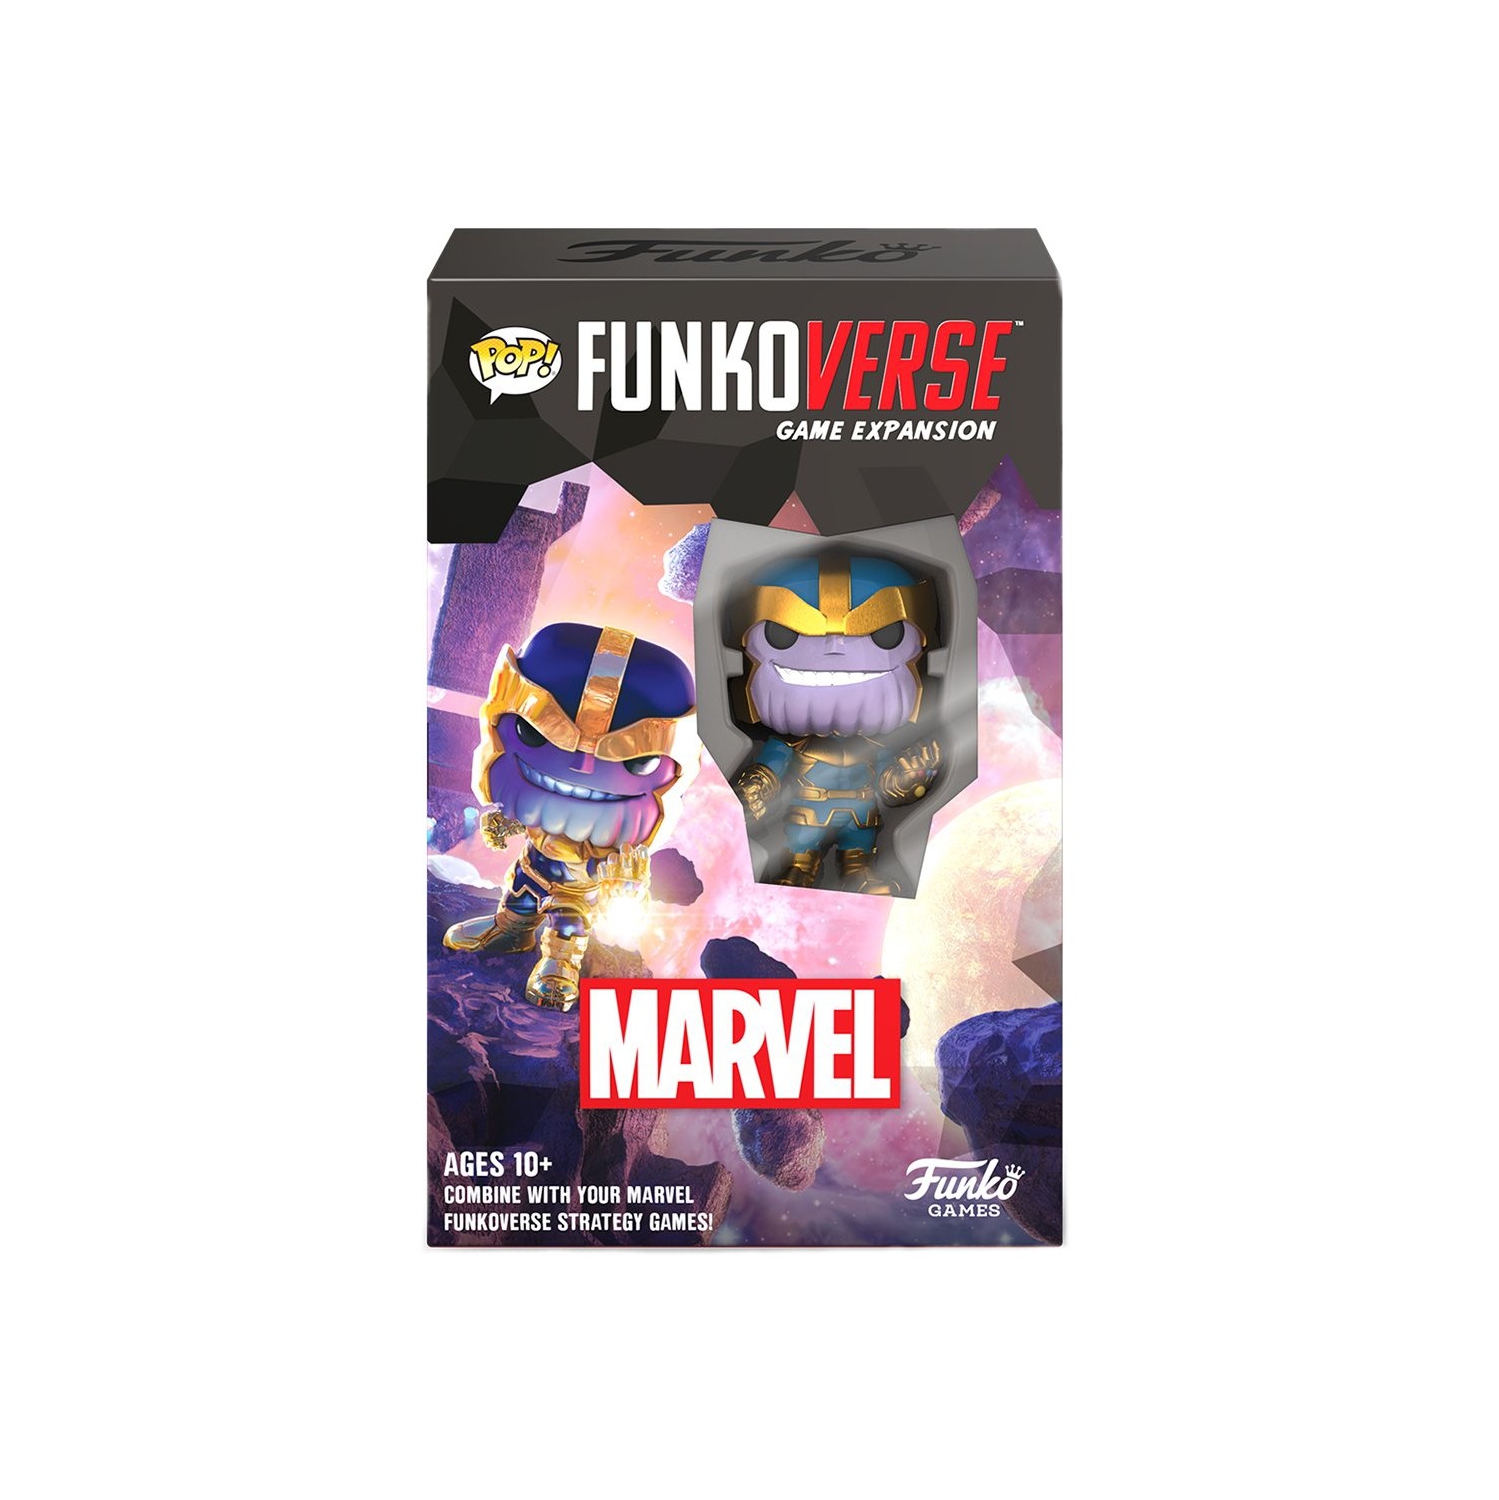 Pop! Funkoverse Strategy Marvel 101 Thanos 1-Pack 2-4 players, ages 10+, 20-60 minutes